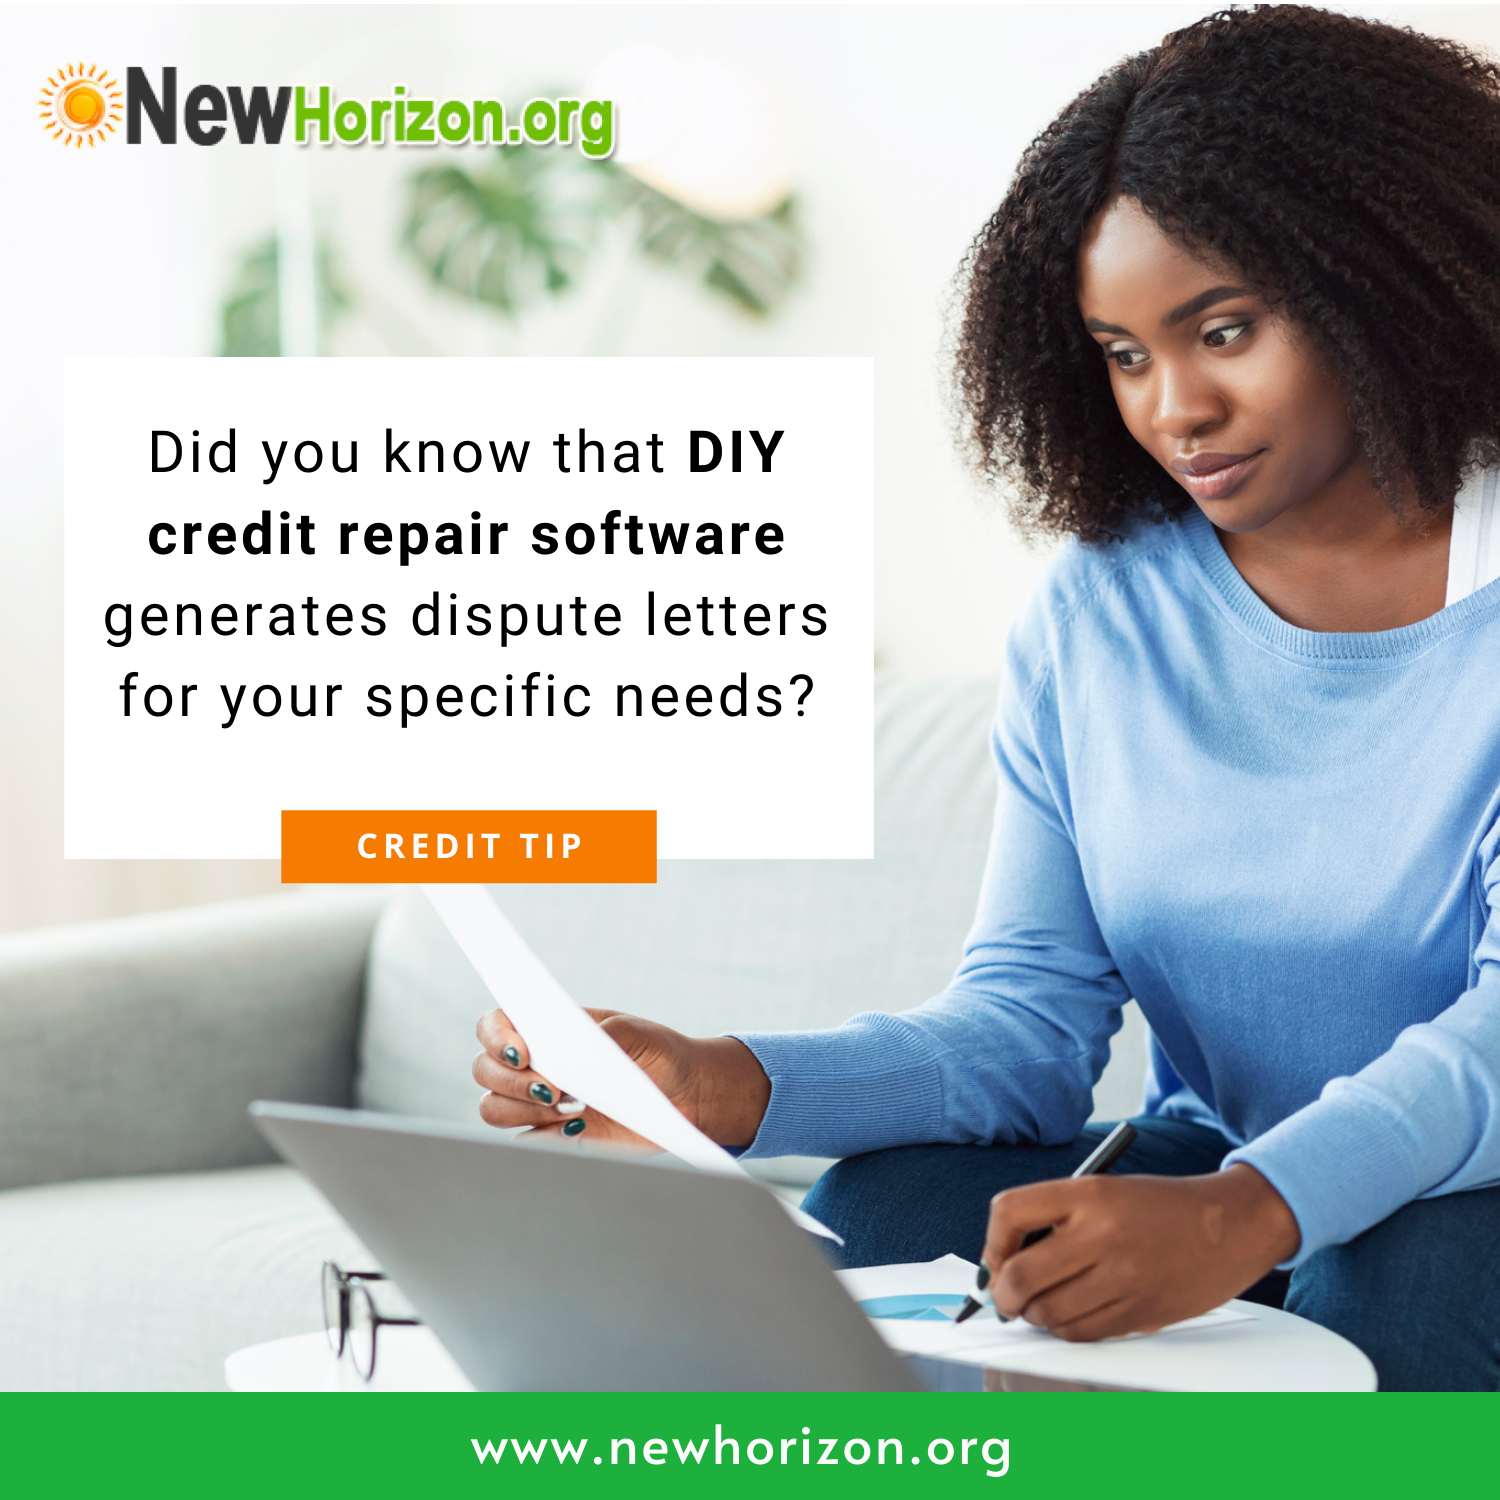 Did you know that DIY credit repair software generates dispute letters for your specific needs